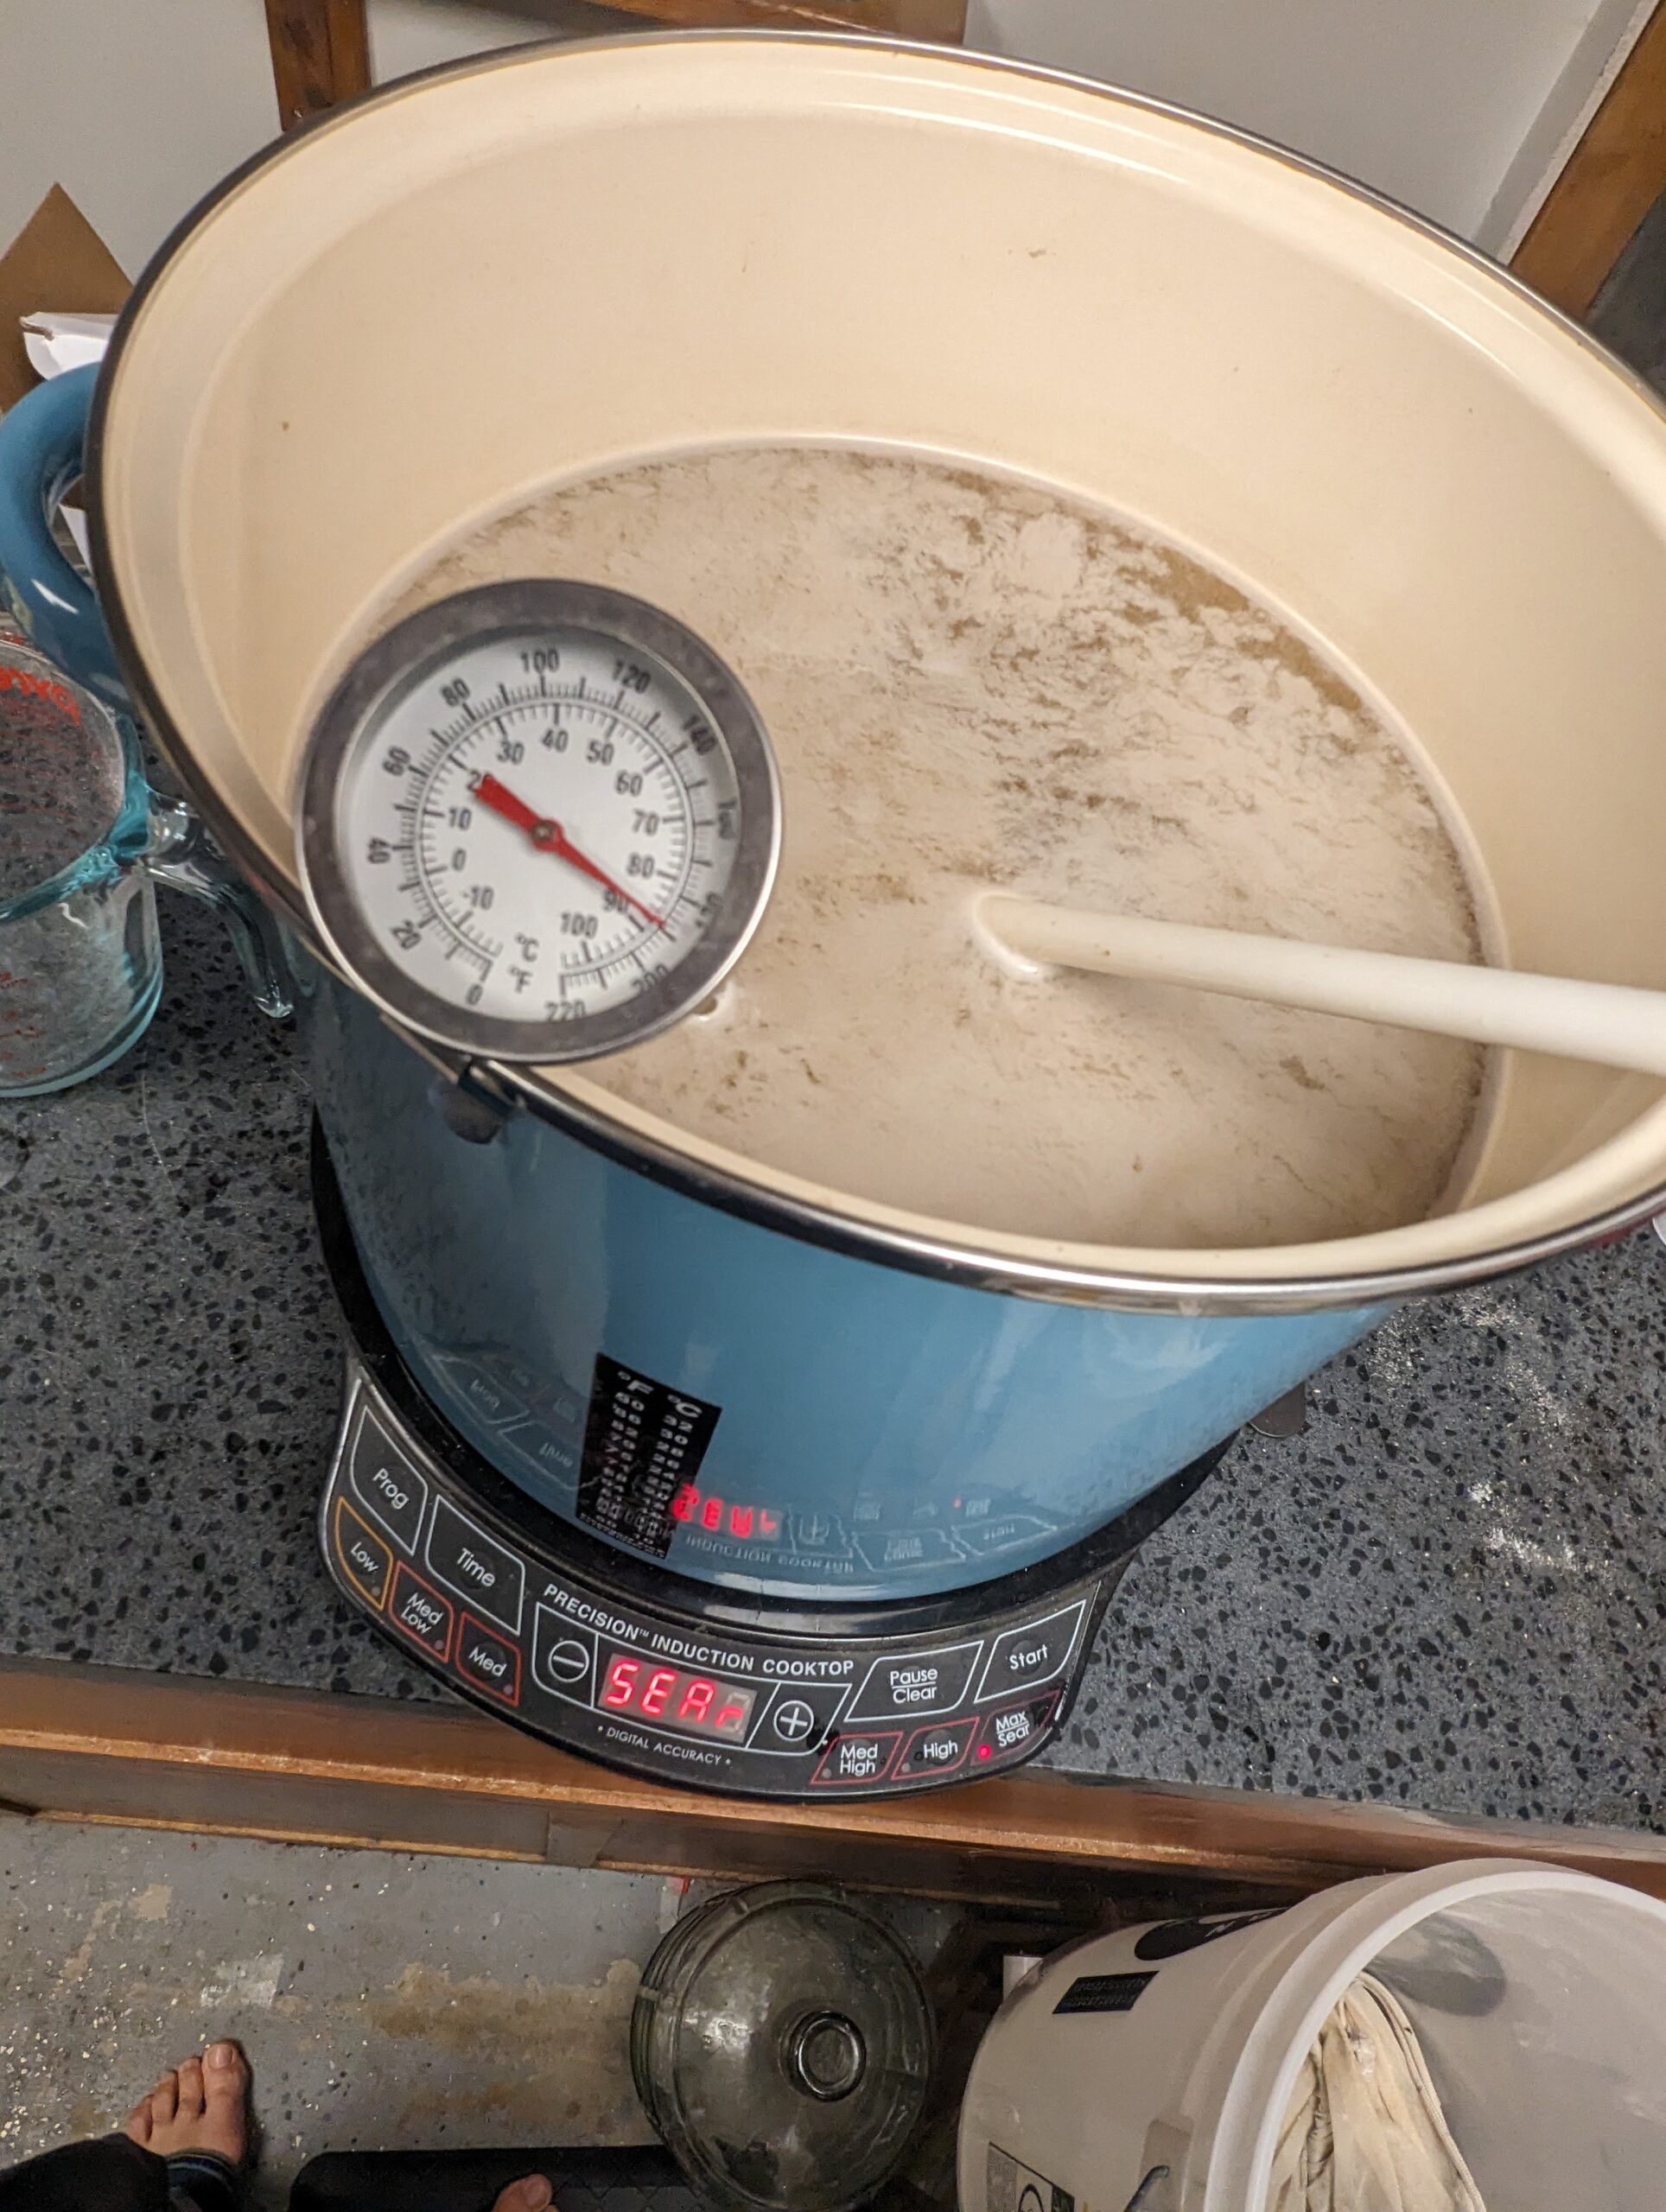 Back Yard Yeast Experiment: Brewing the beer